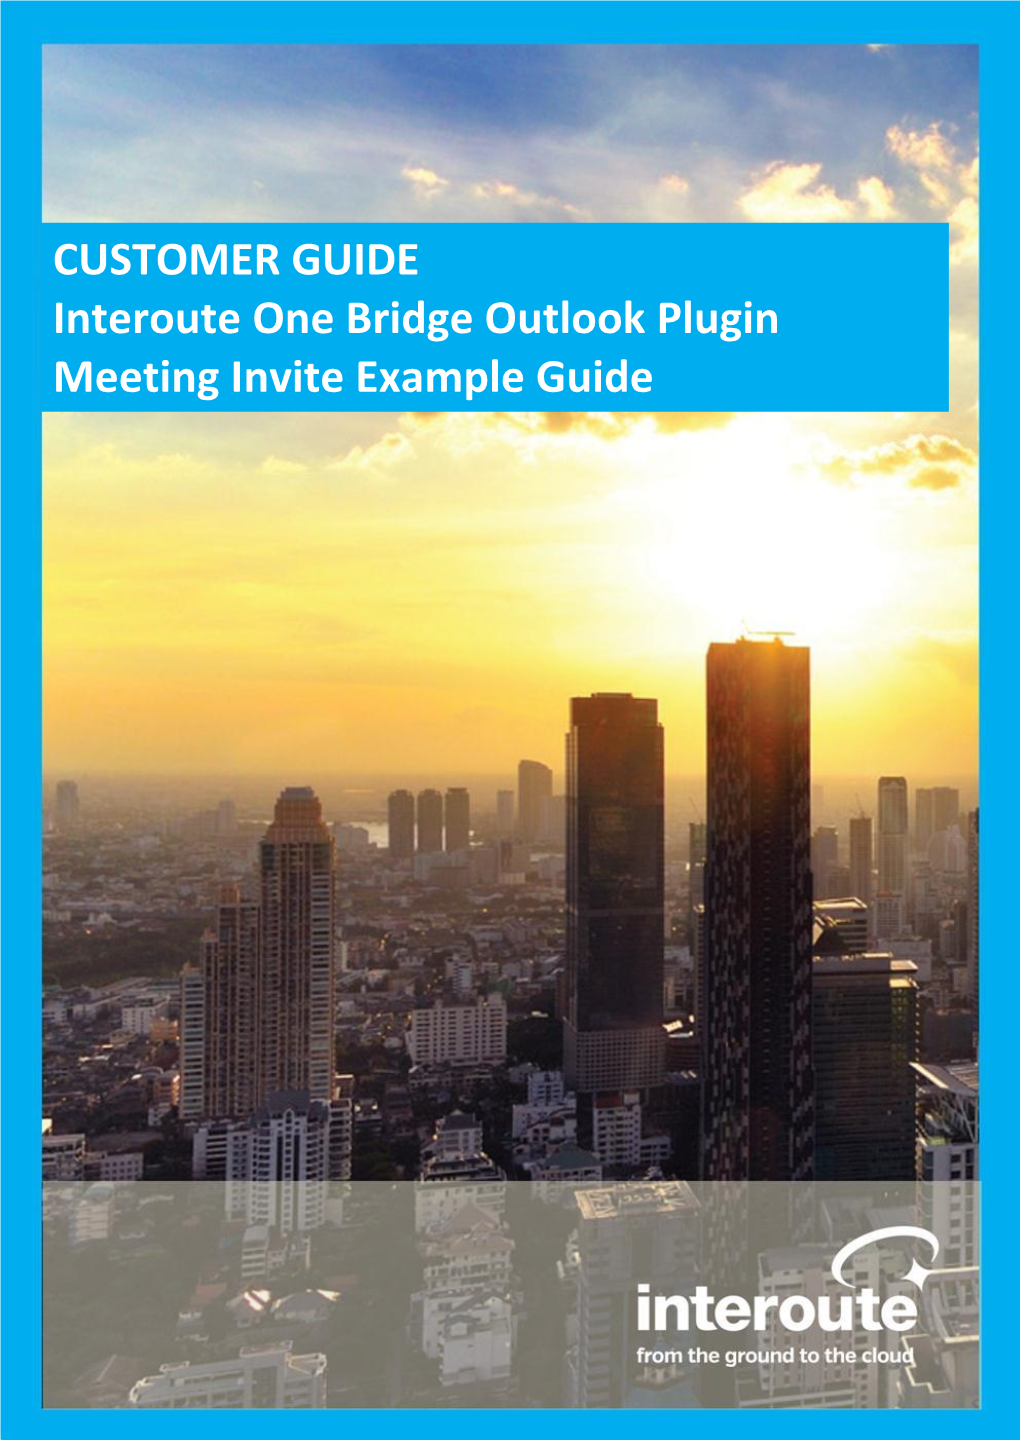 CUSTOMER GUIDE Interoute One Bridge Outlook Plugin Meeting Invite Example Guide